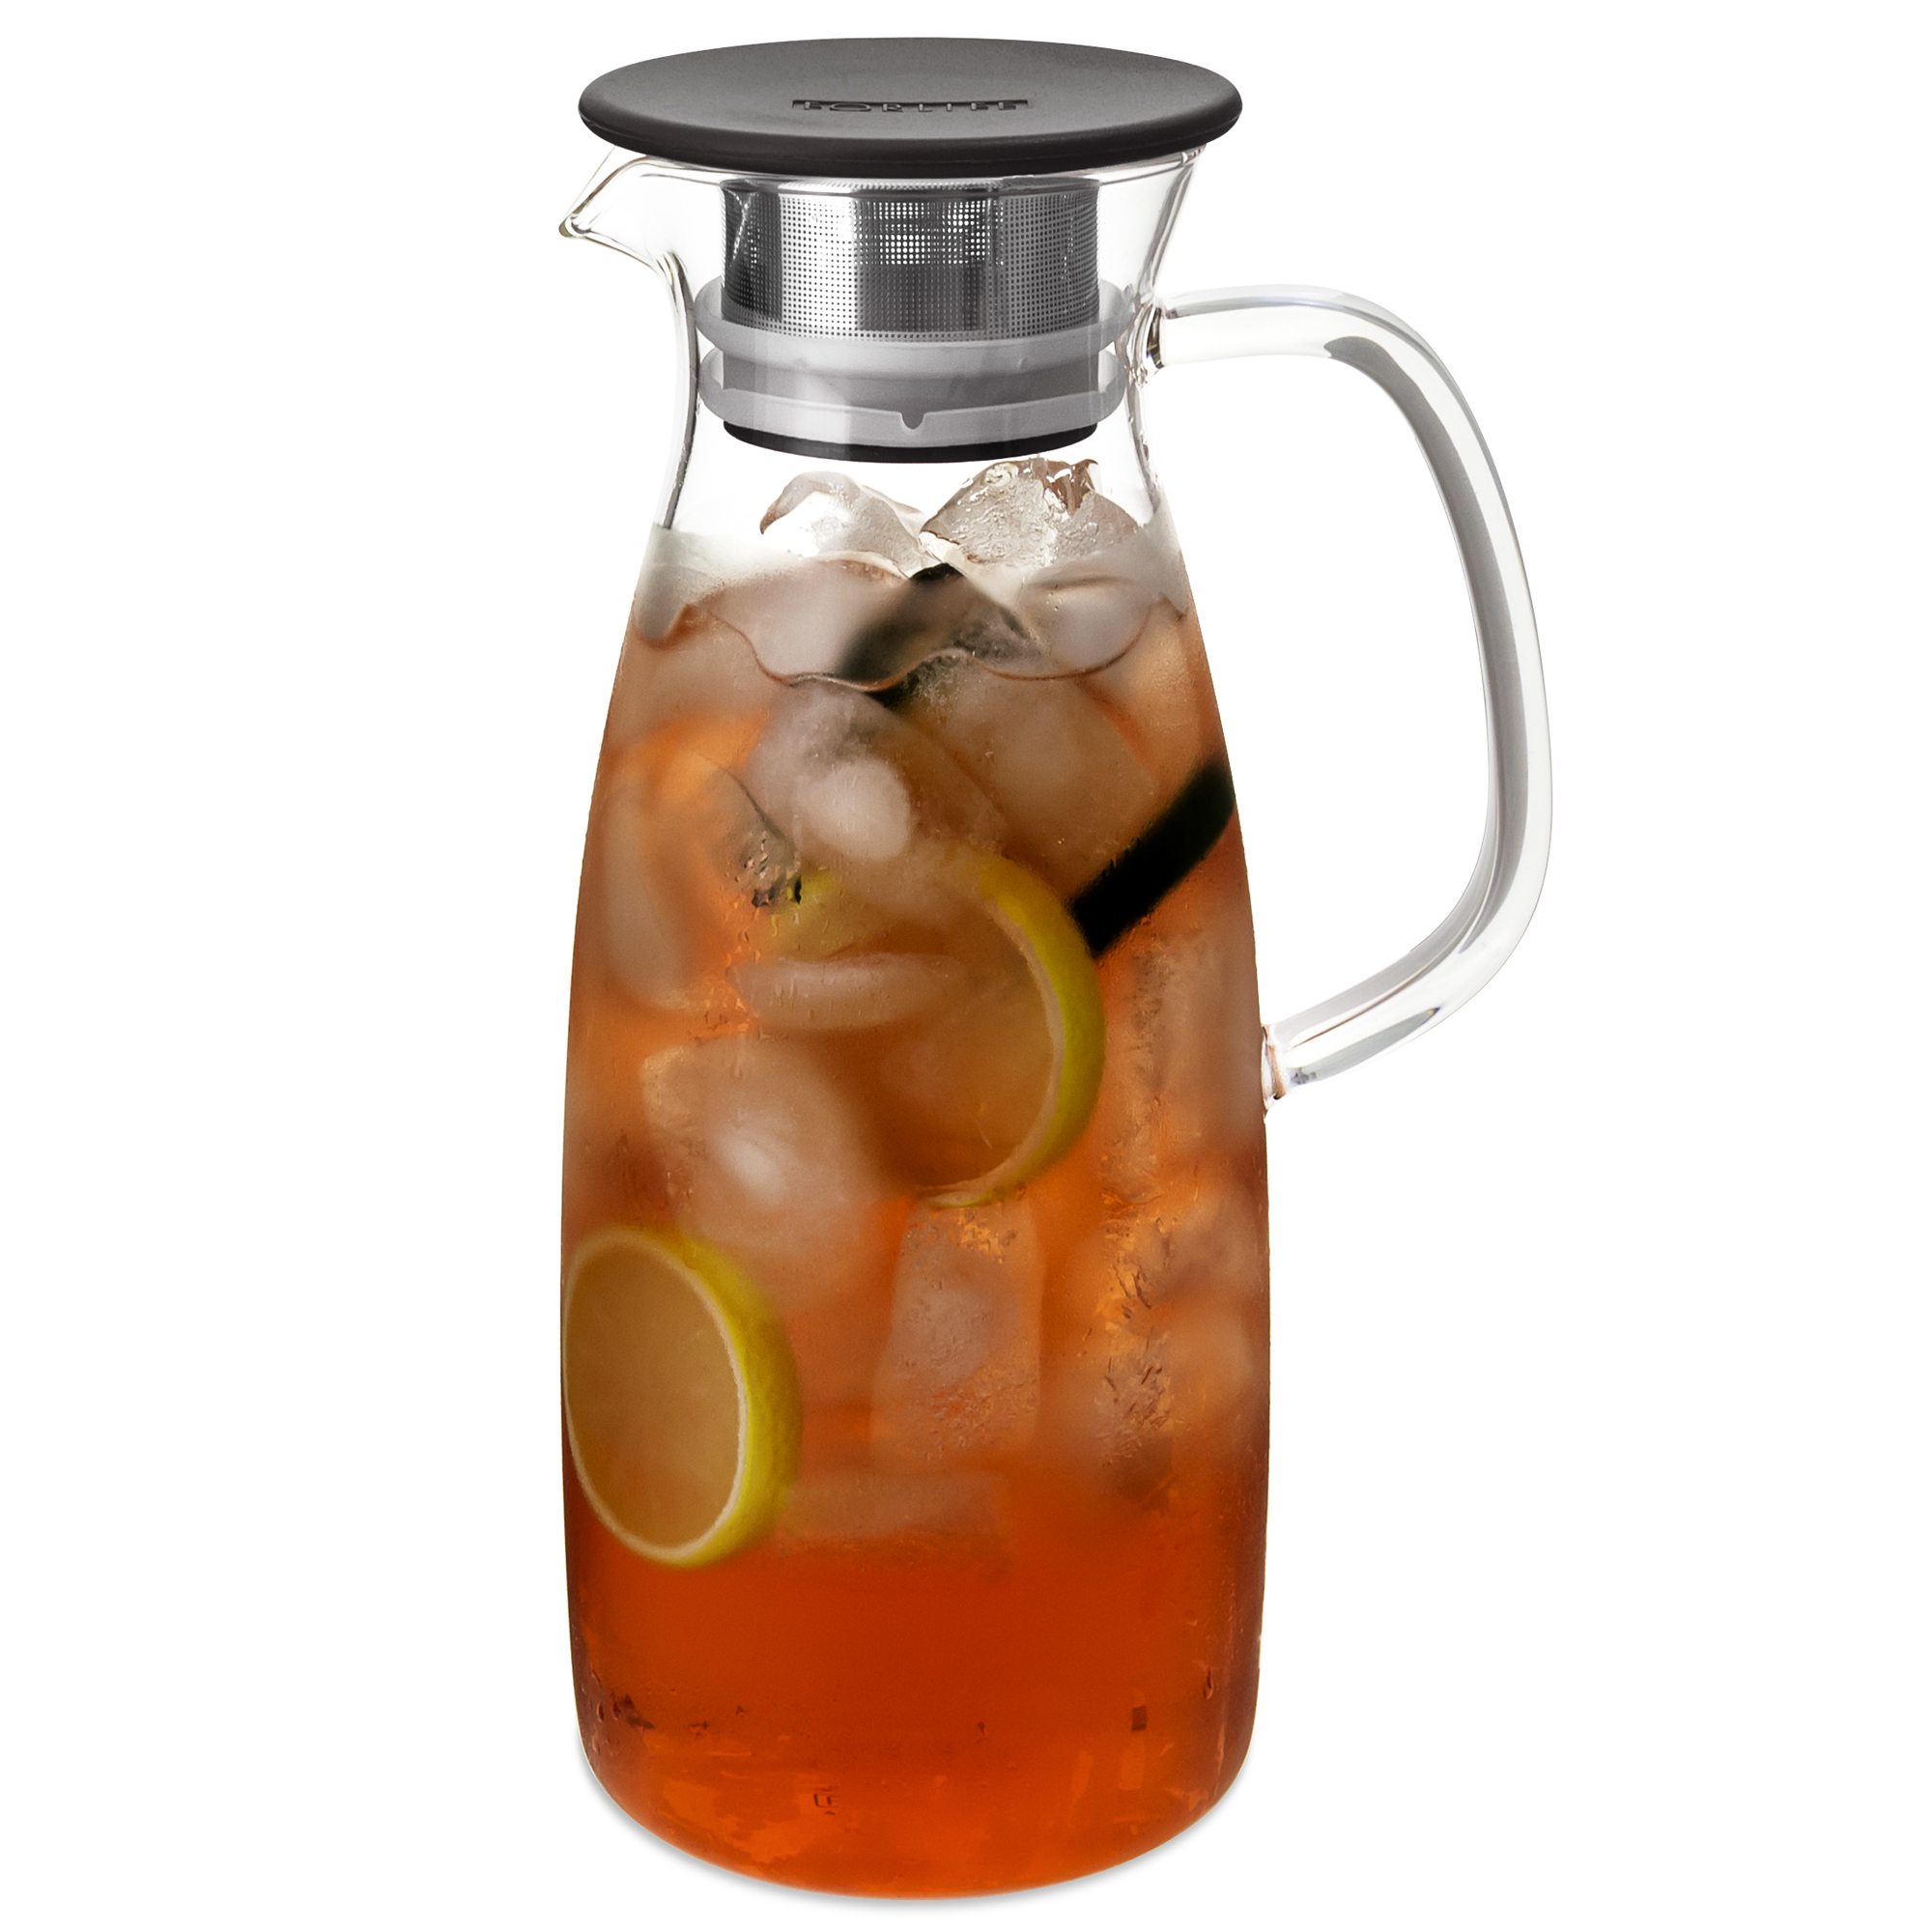 Forlife Lucent Glass Iced Tea Jug w/ Capsule Infuser 48 oz.-Mint Green